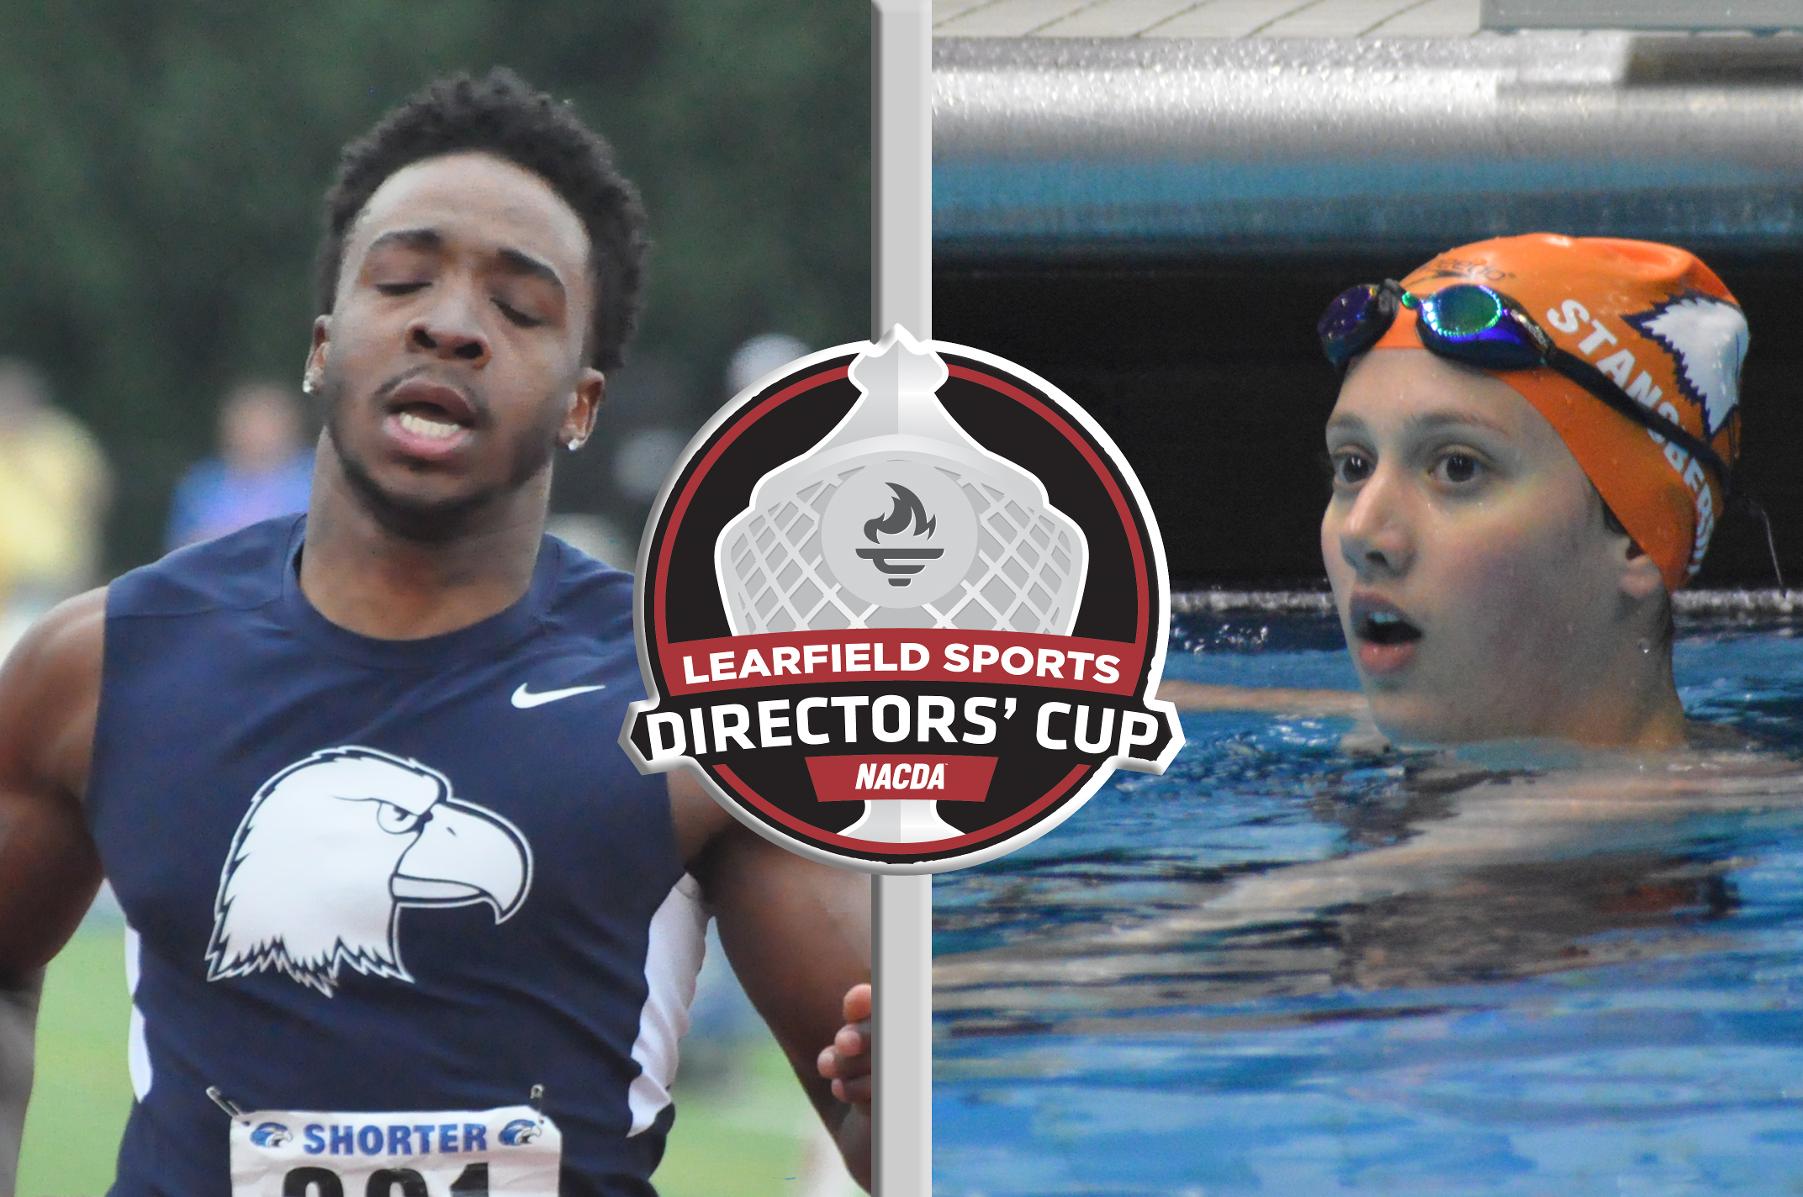 Eagles sit 18th in Learfield Director’s Cup standings